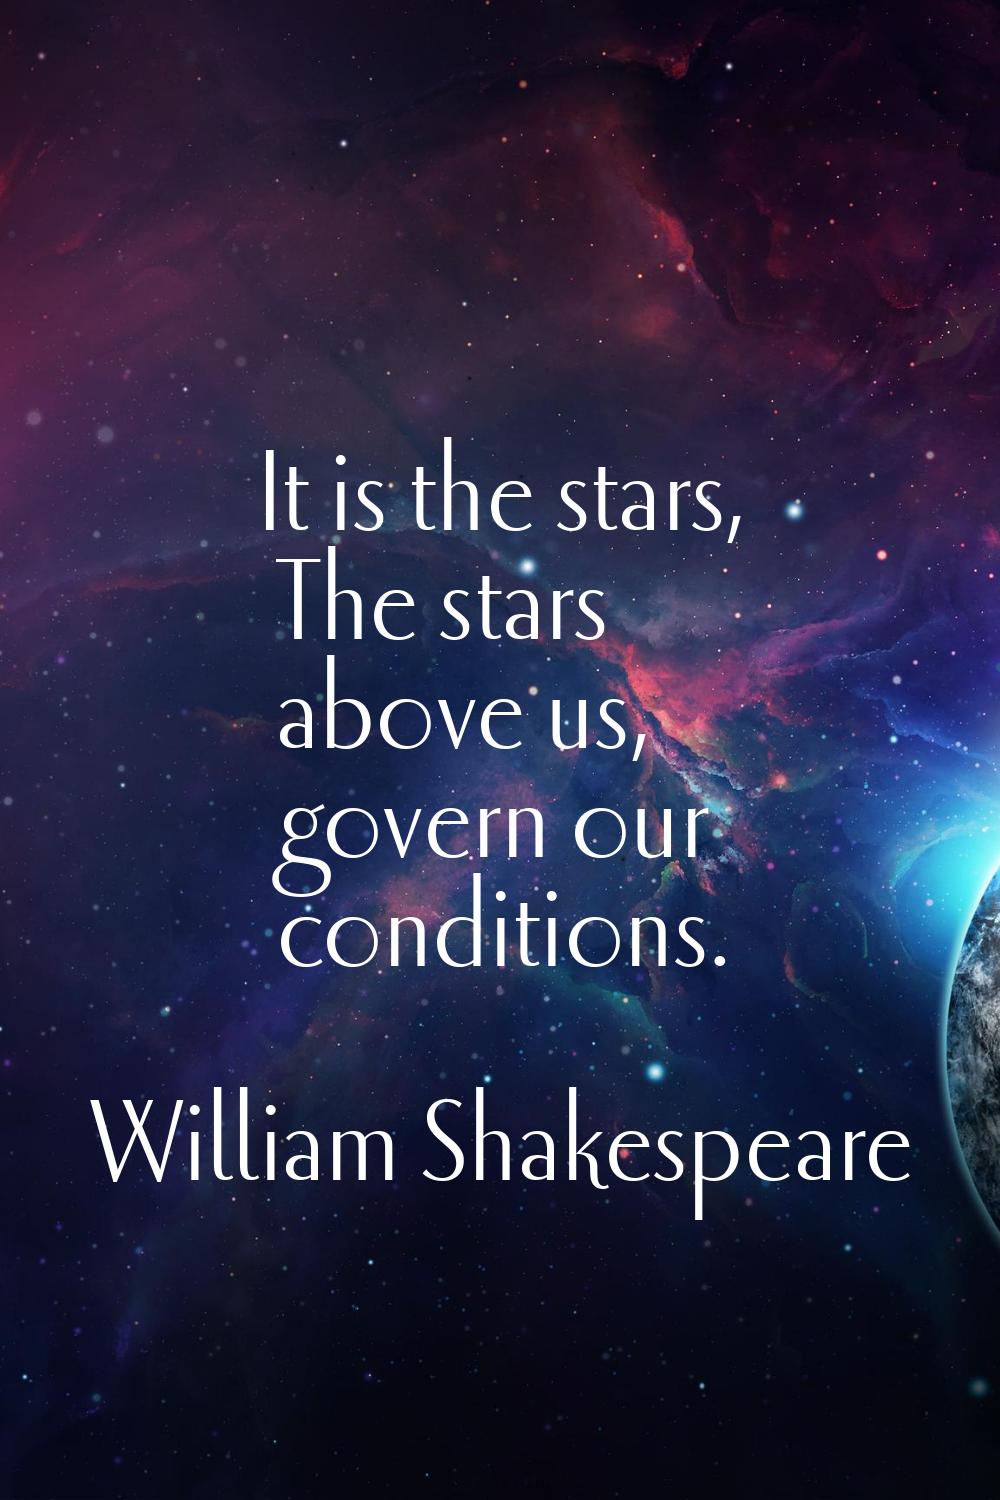 It is the stars, The stars above us, govern our conditions.